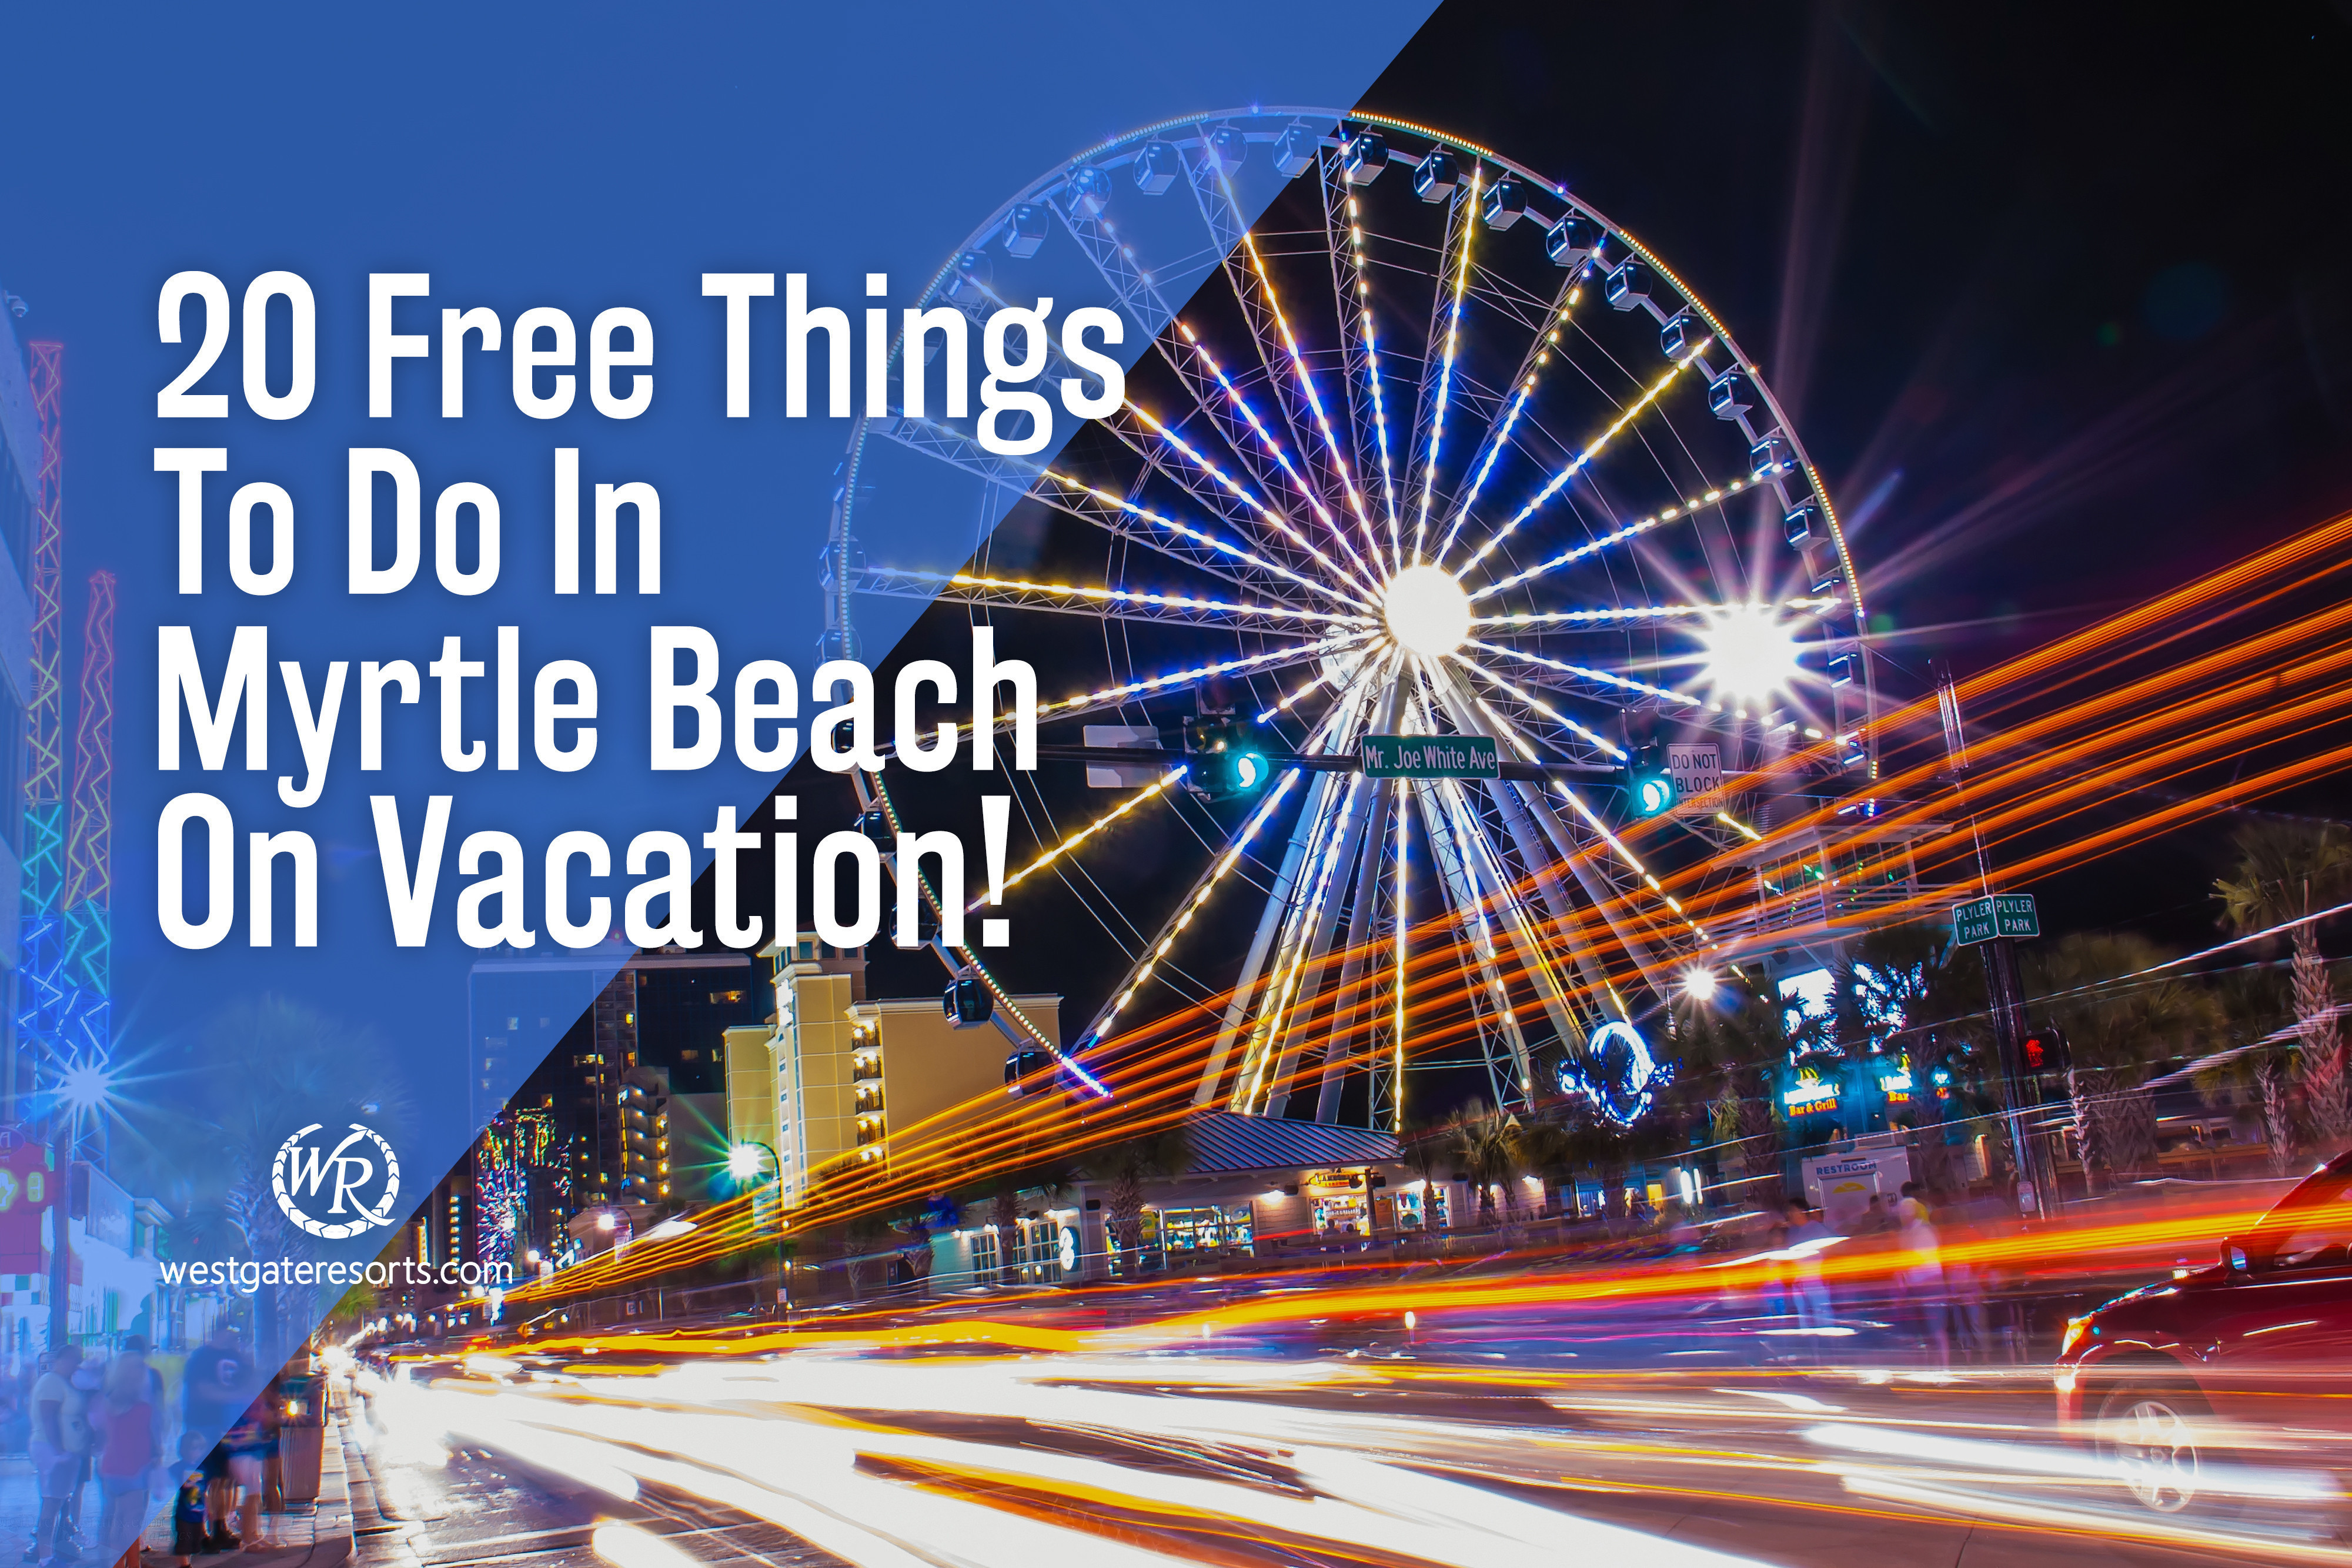 20 Free Things To Do In Myrtle Beach On Vacation | Things To Do In